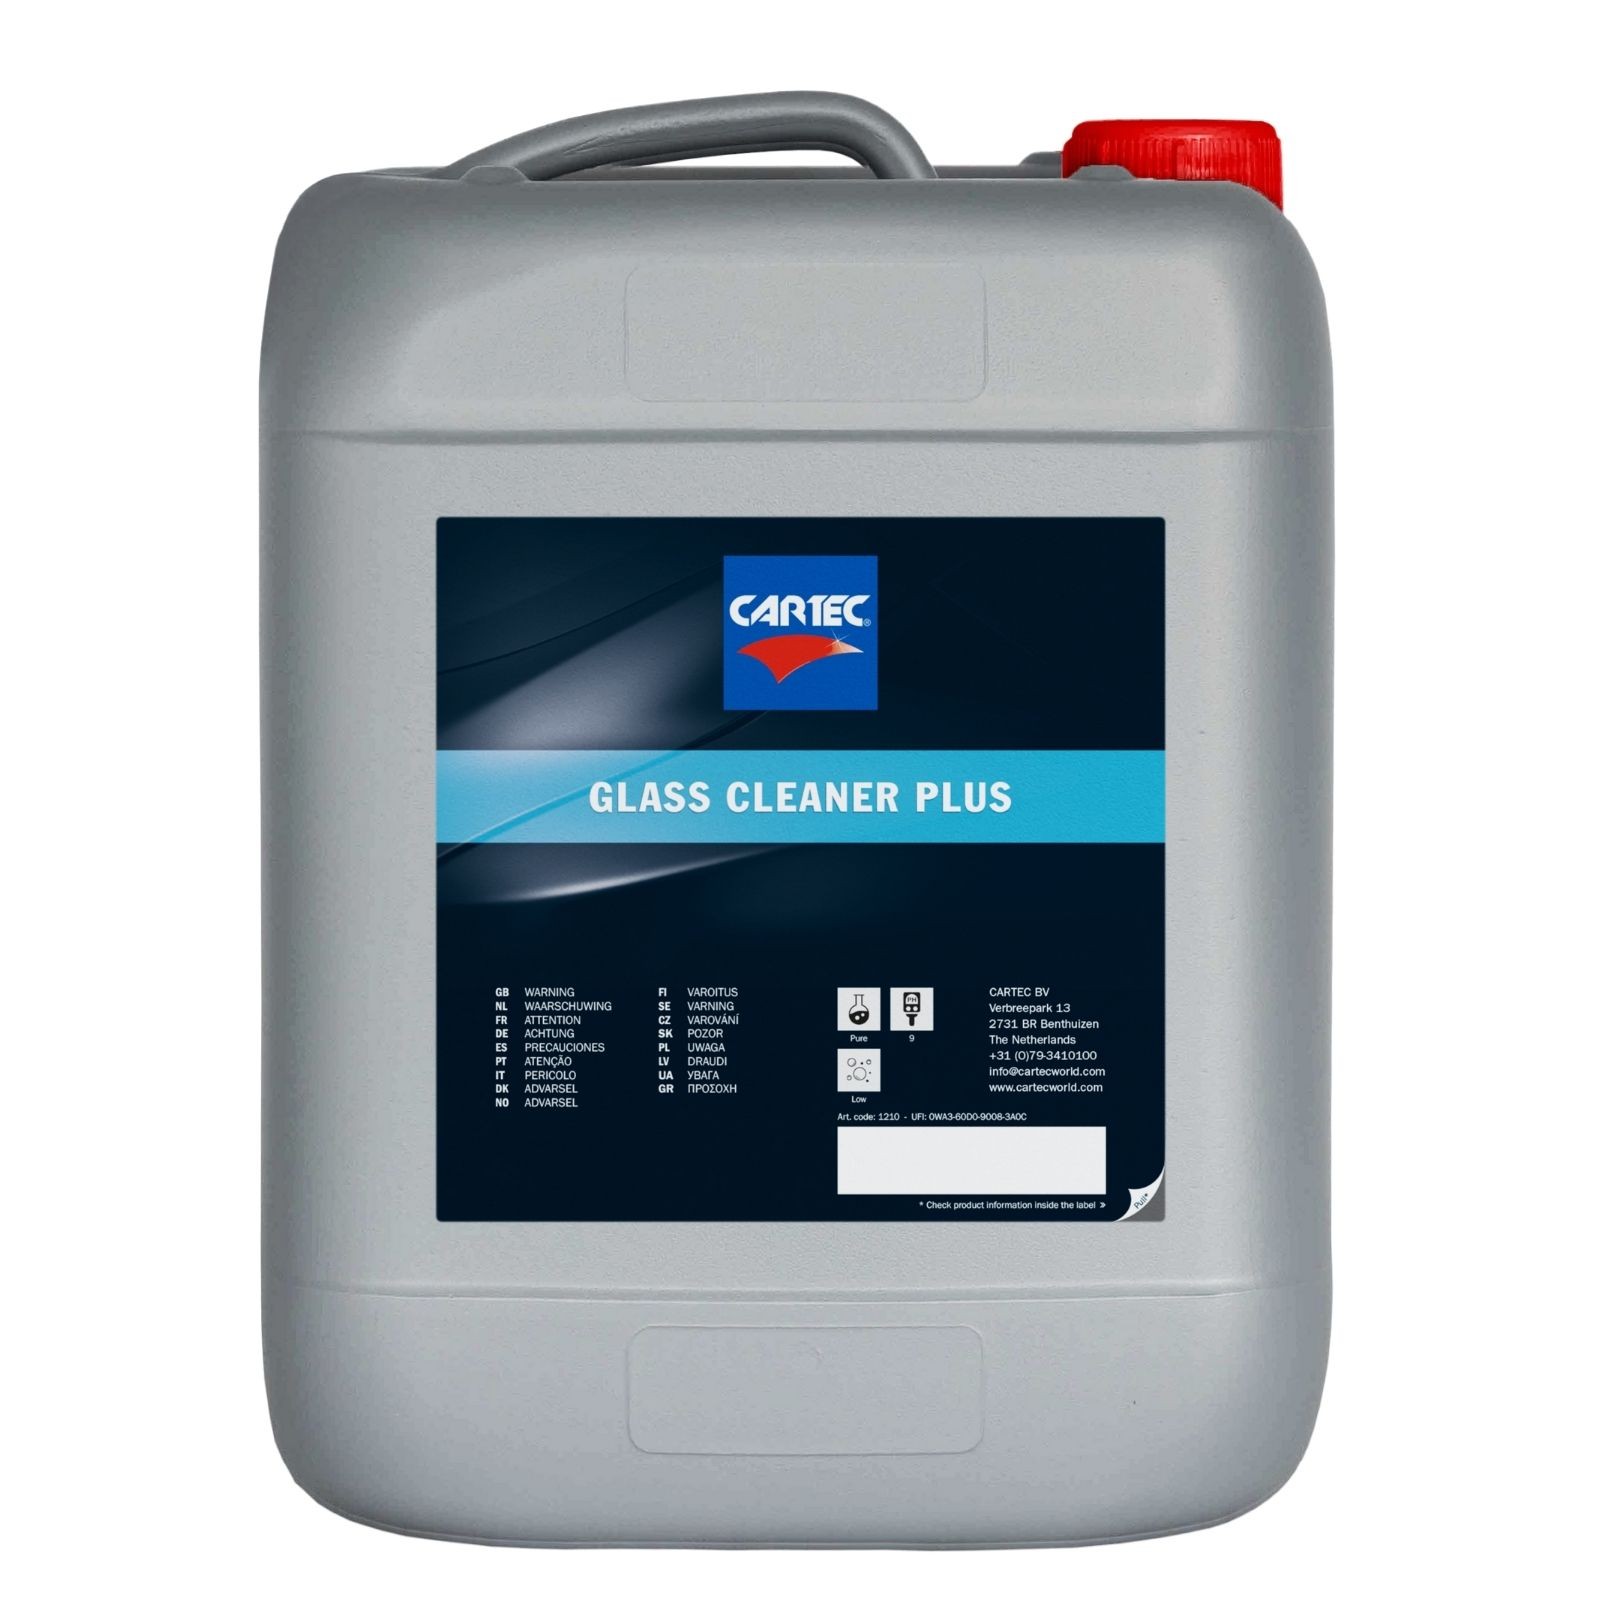 Glass Cleaner Plus